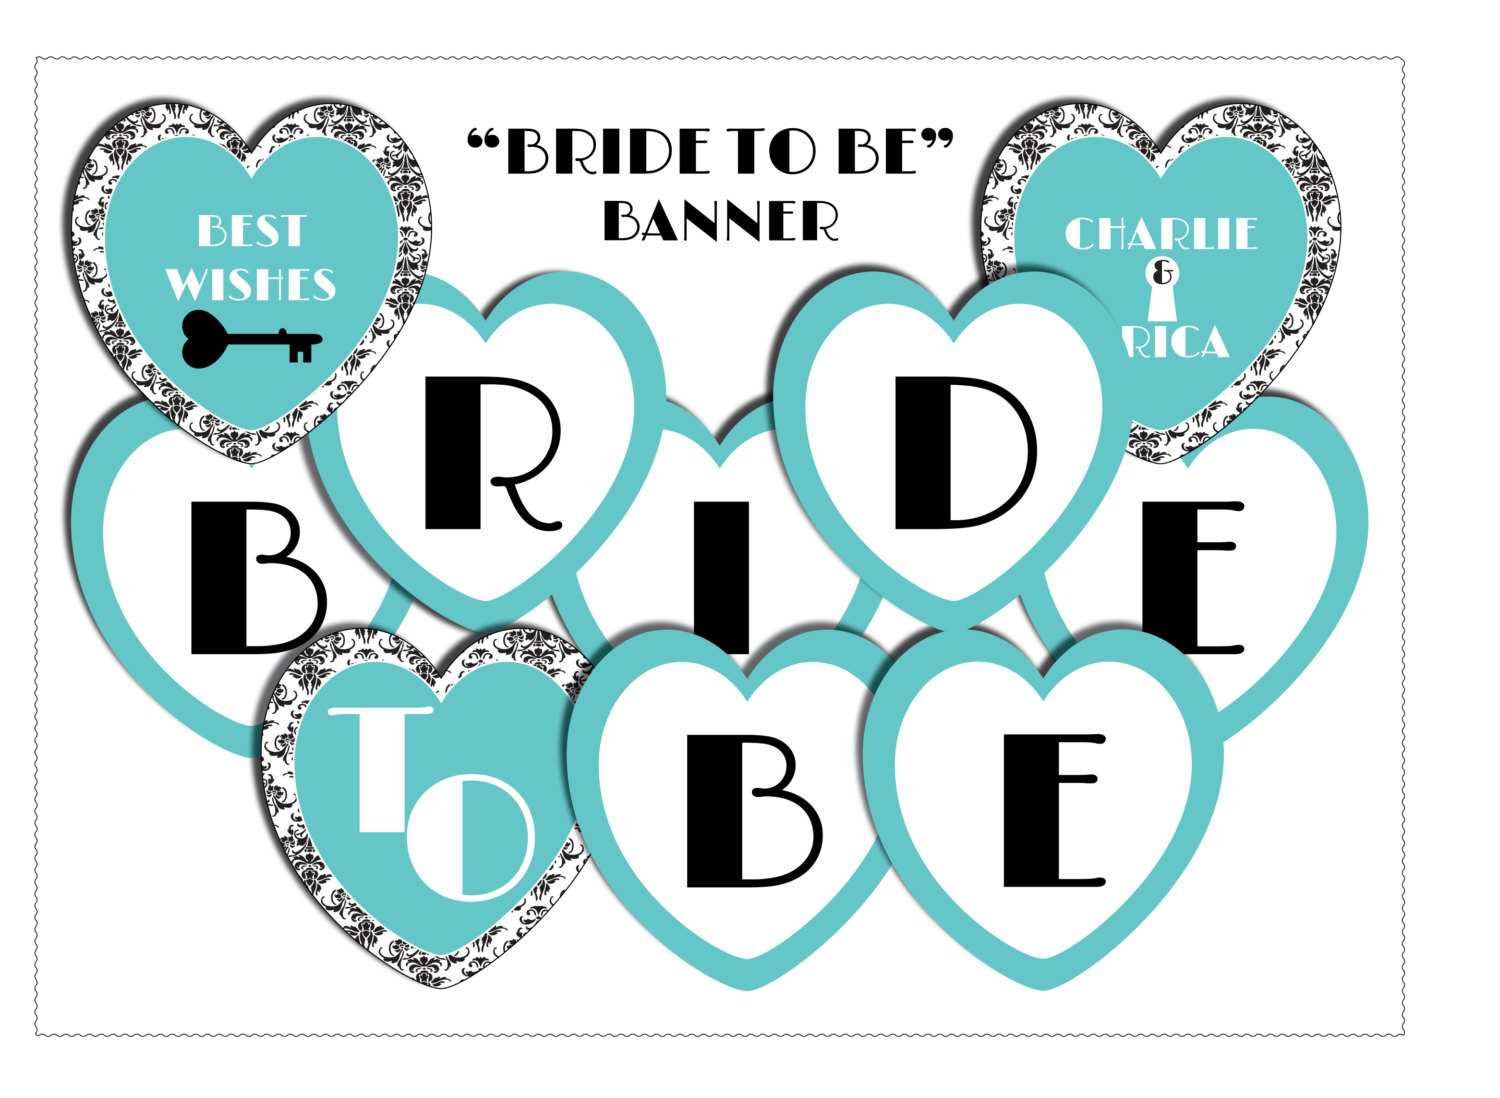 From Miss To Mrs Banner Template – Best Banner Design 2018 With Bride To Be Banner Template